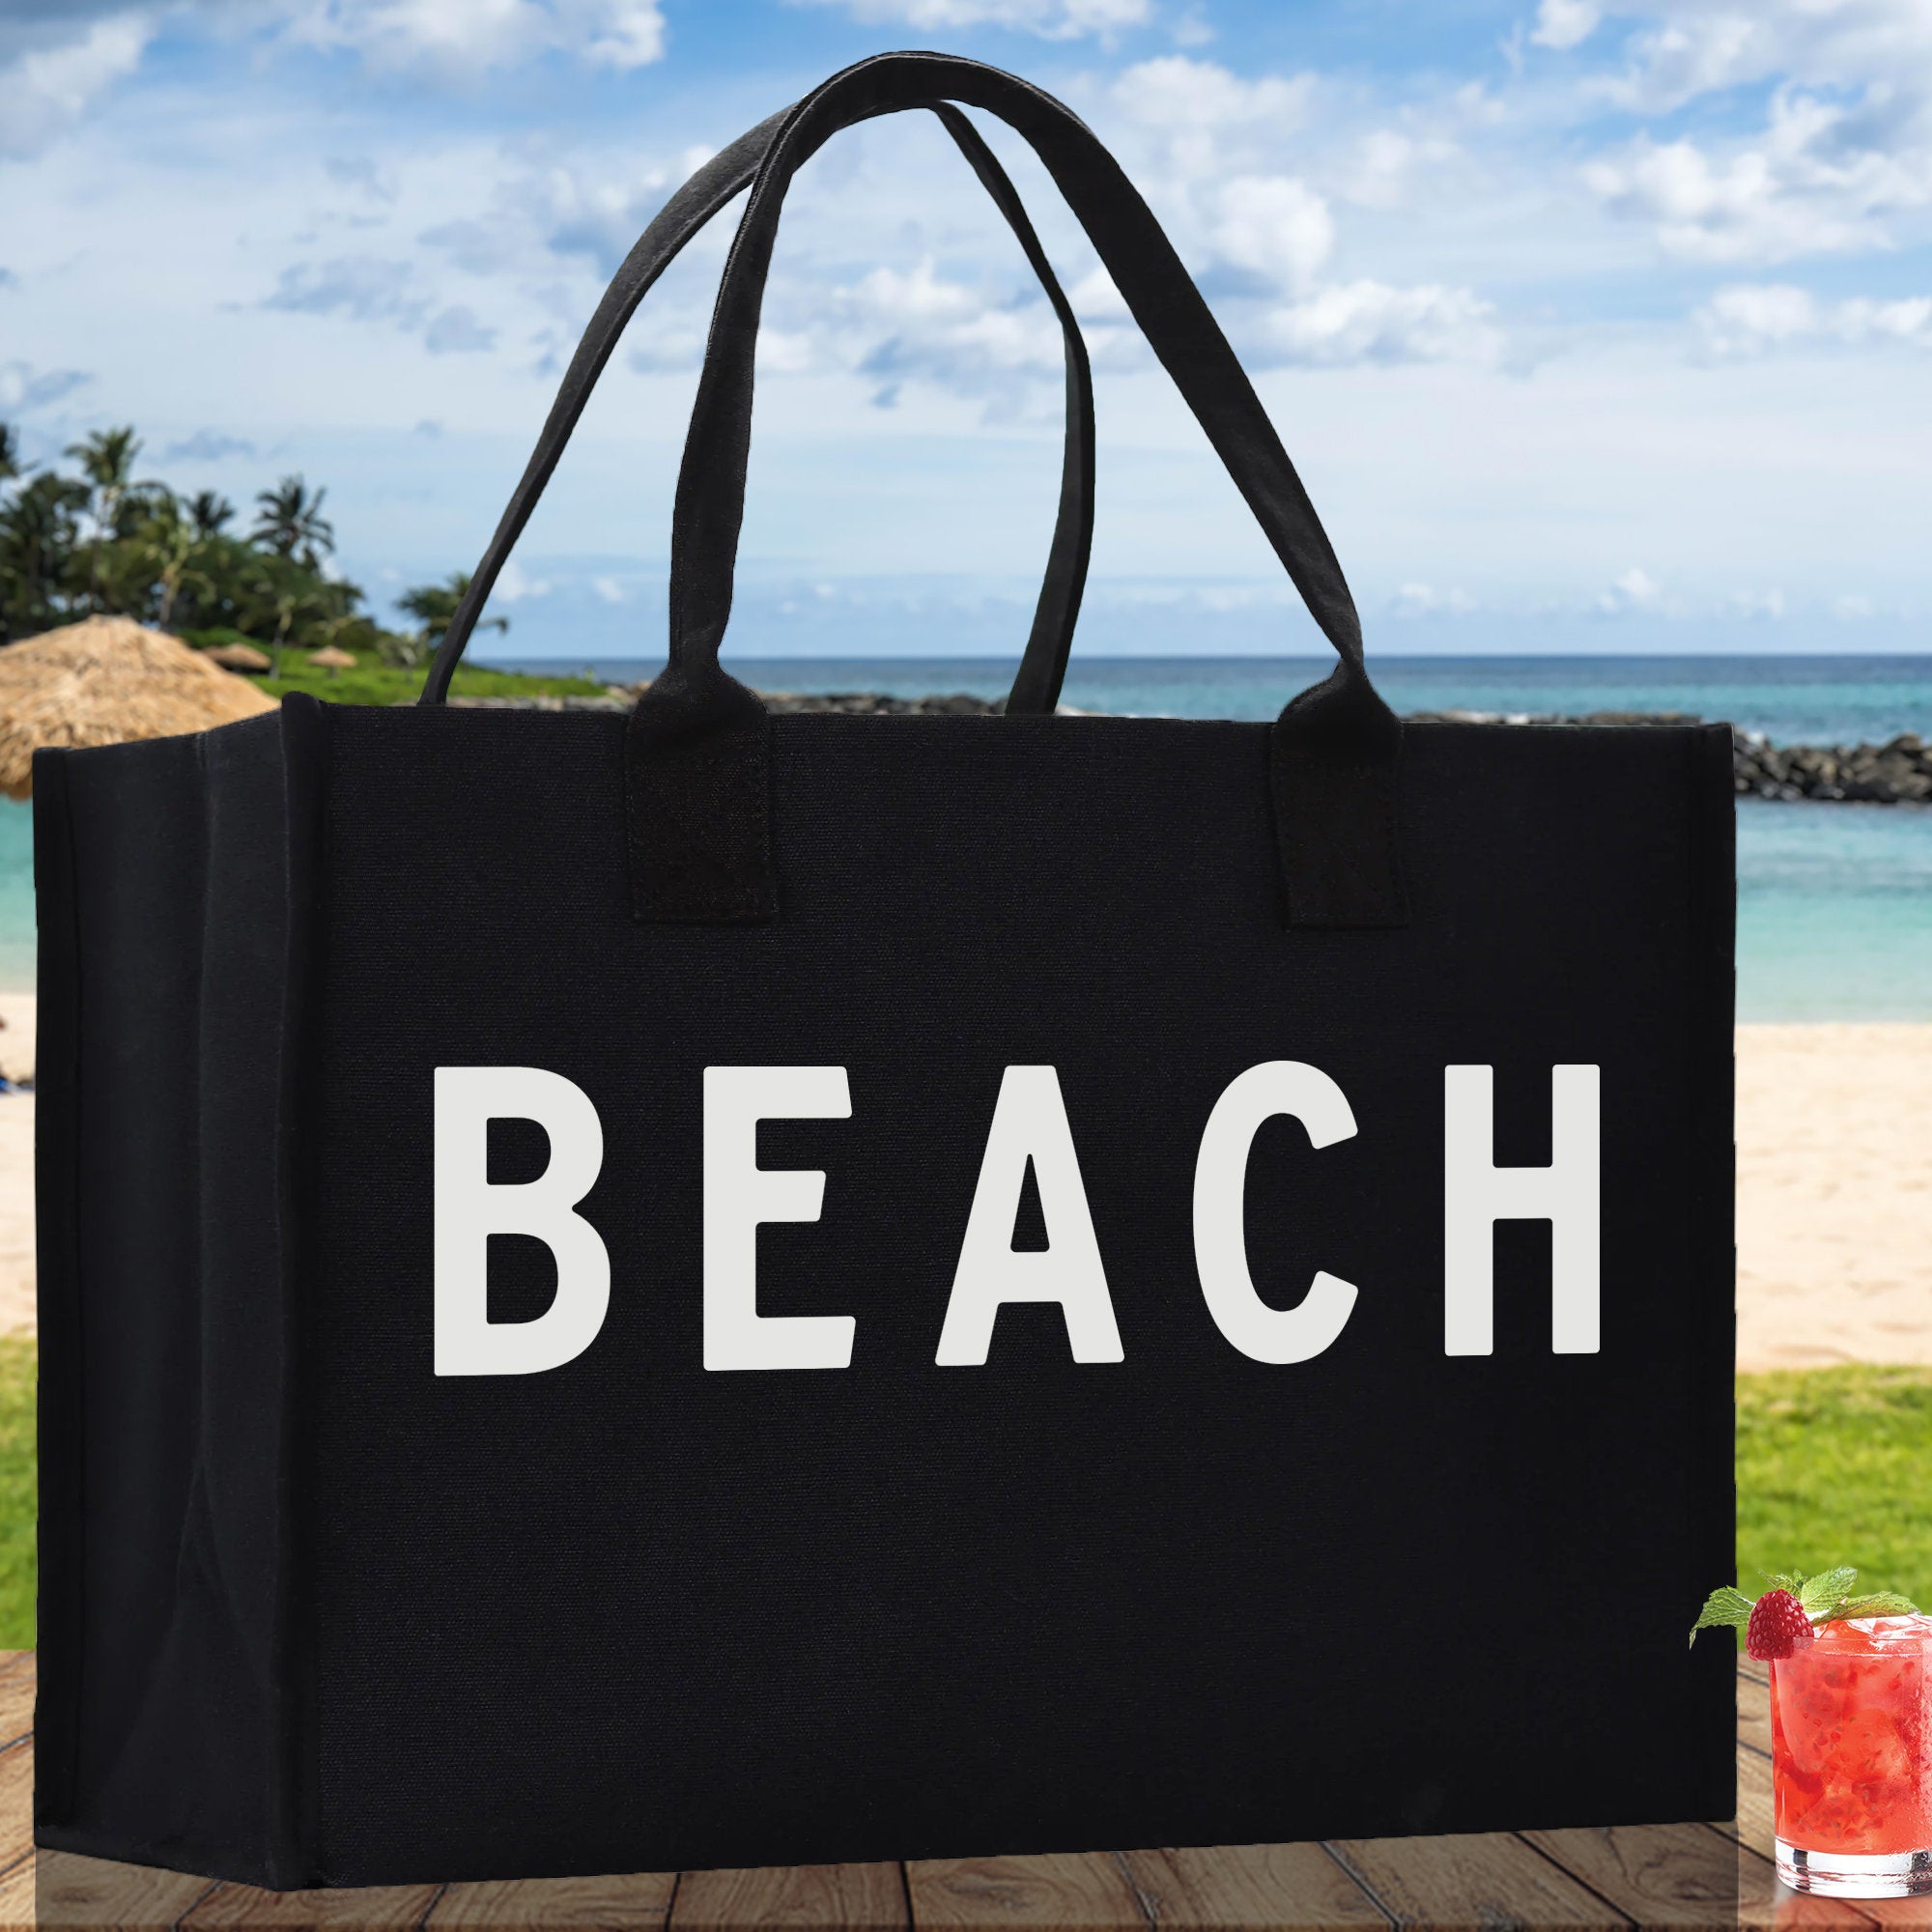 Beach Cotton Canvas Chic Tote Bag Multipurpose Tote Weekender Tote Gift for Her Outdoor Tote Vacation Tote Large Beach Bag